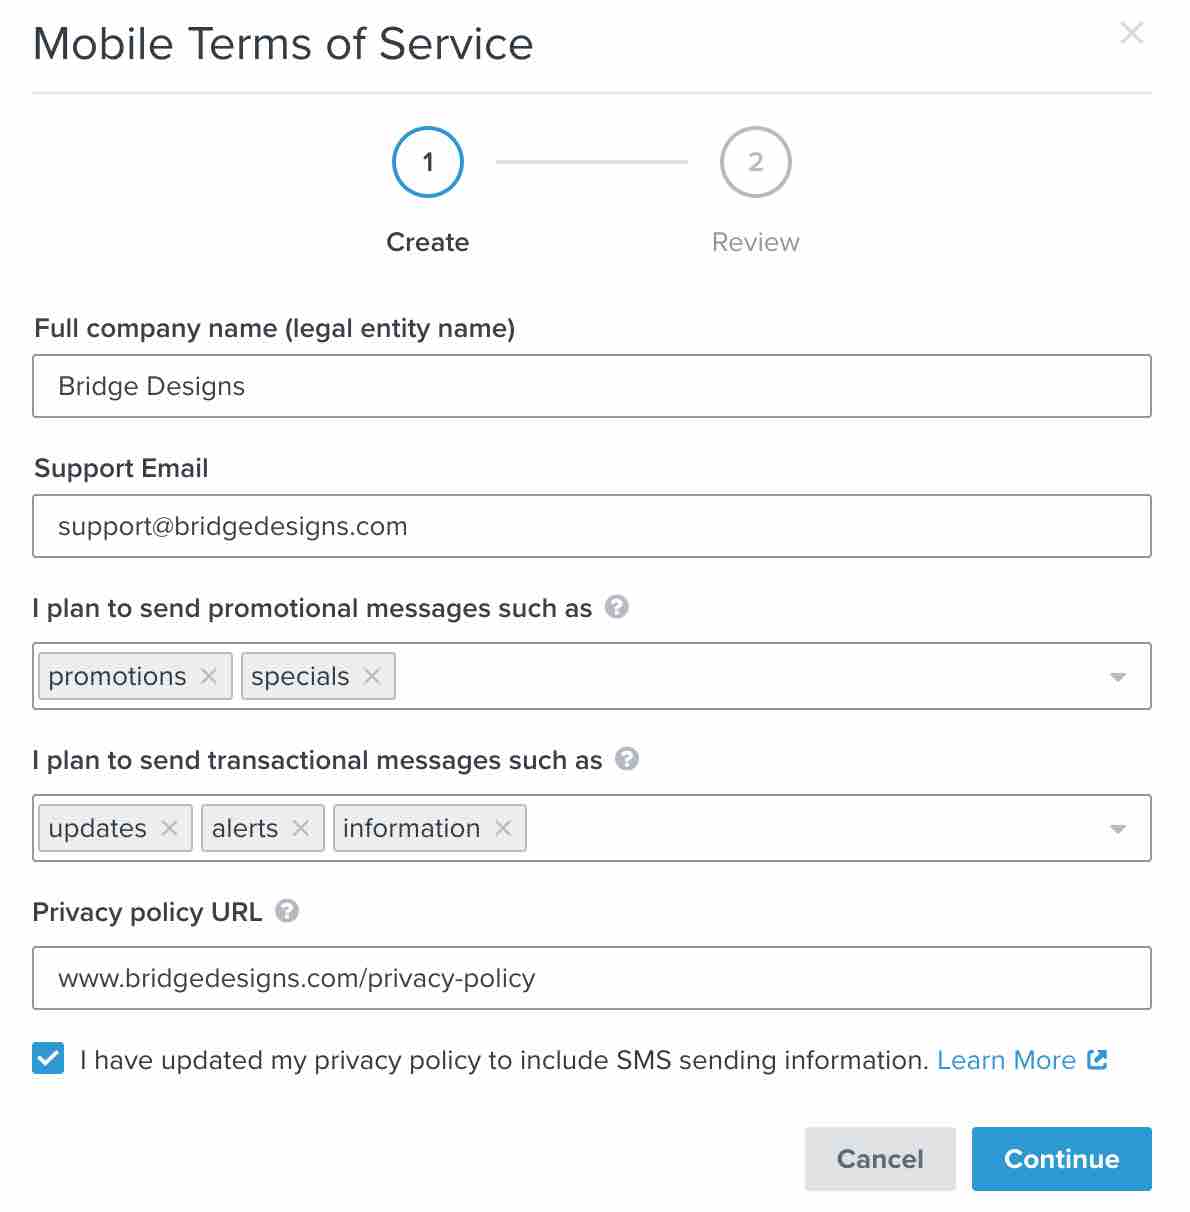 Example of a complete form to create a mobile terms of service